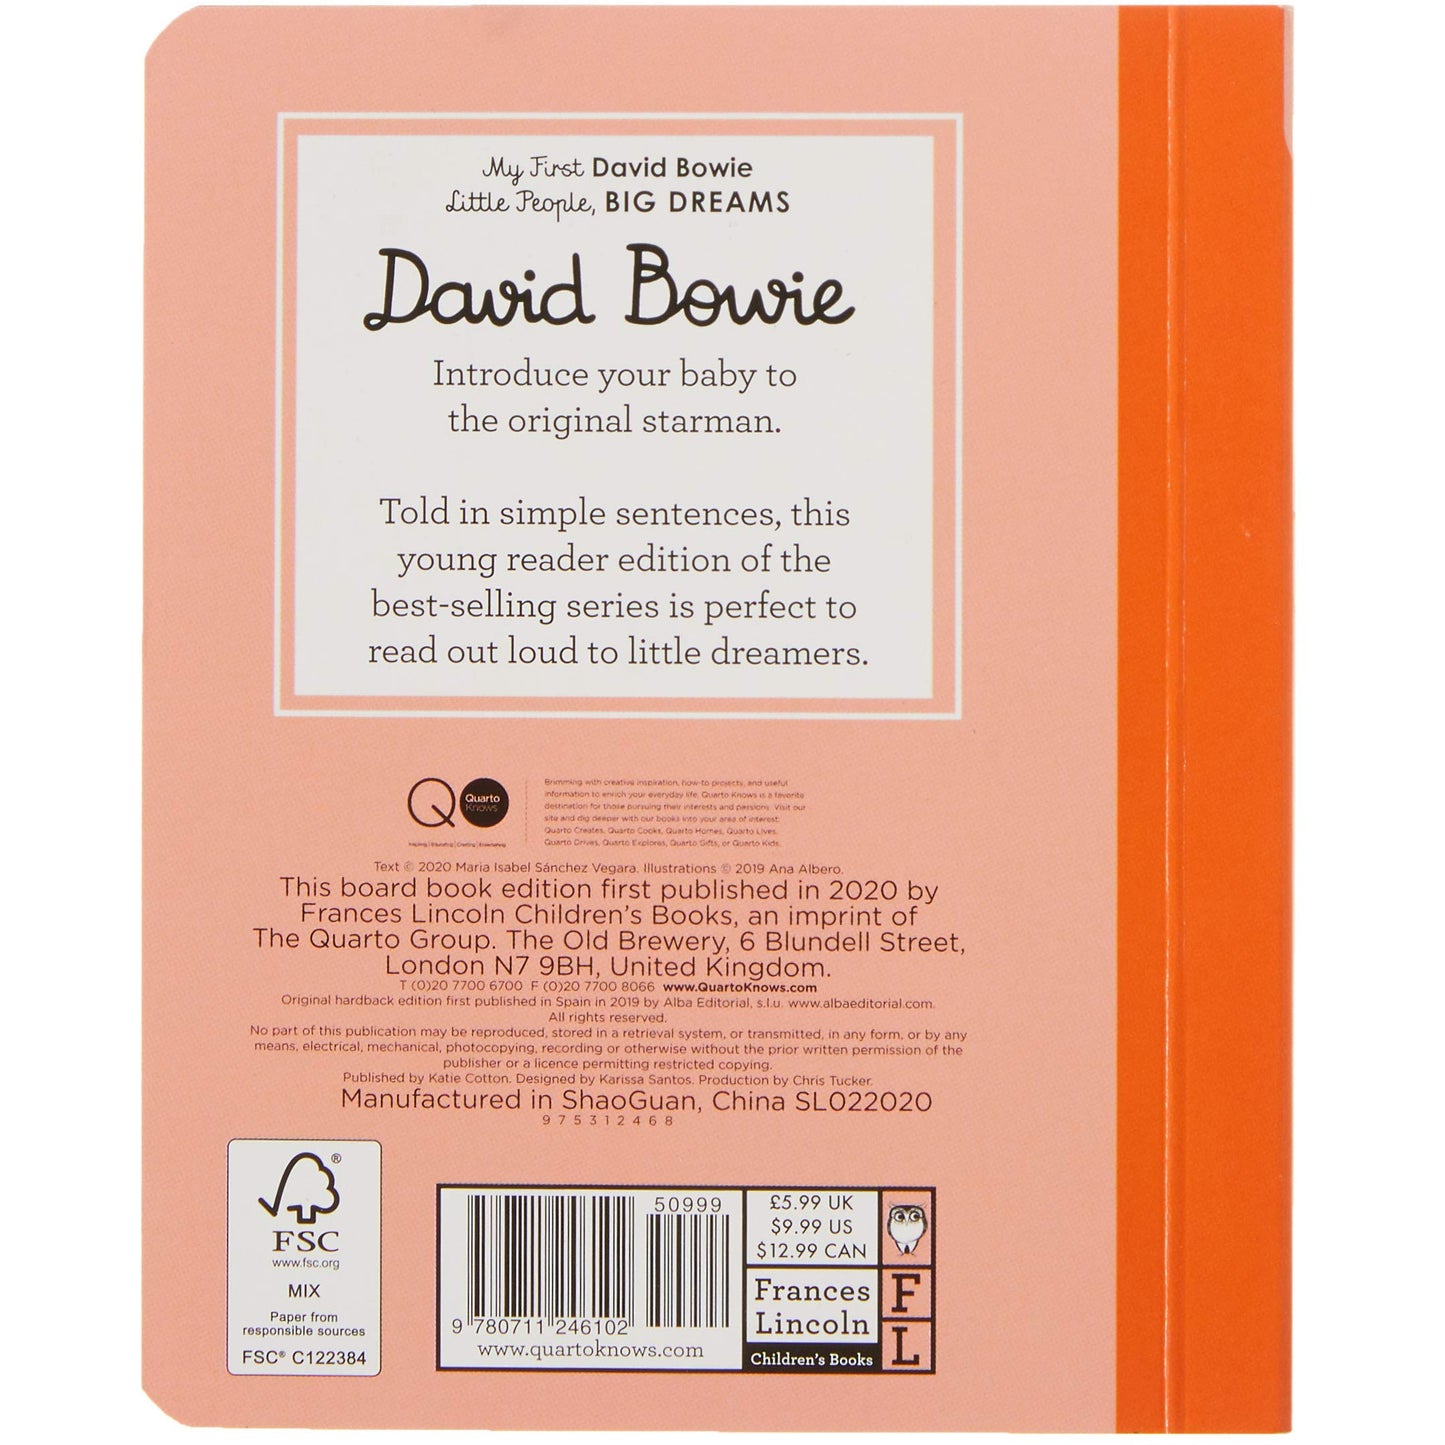 David Bowie - My First Little People BIG DREAMS - Muddy Boots Home UK